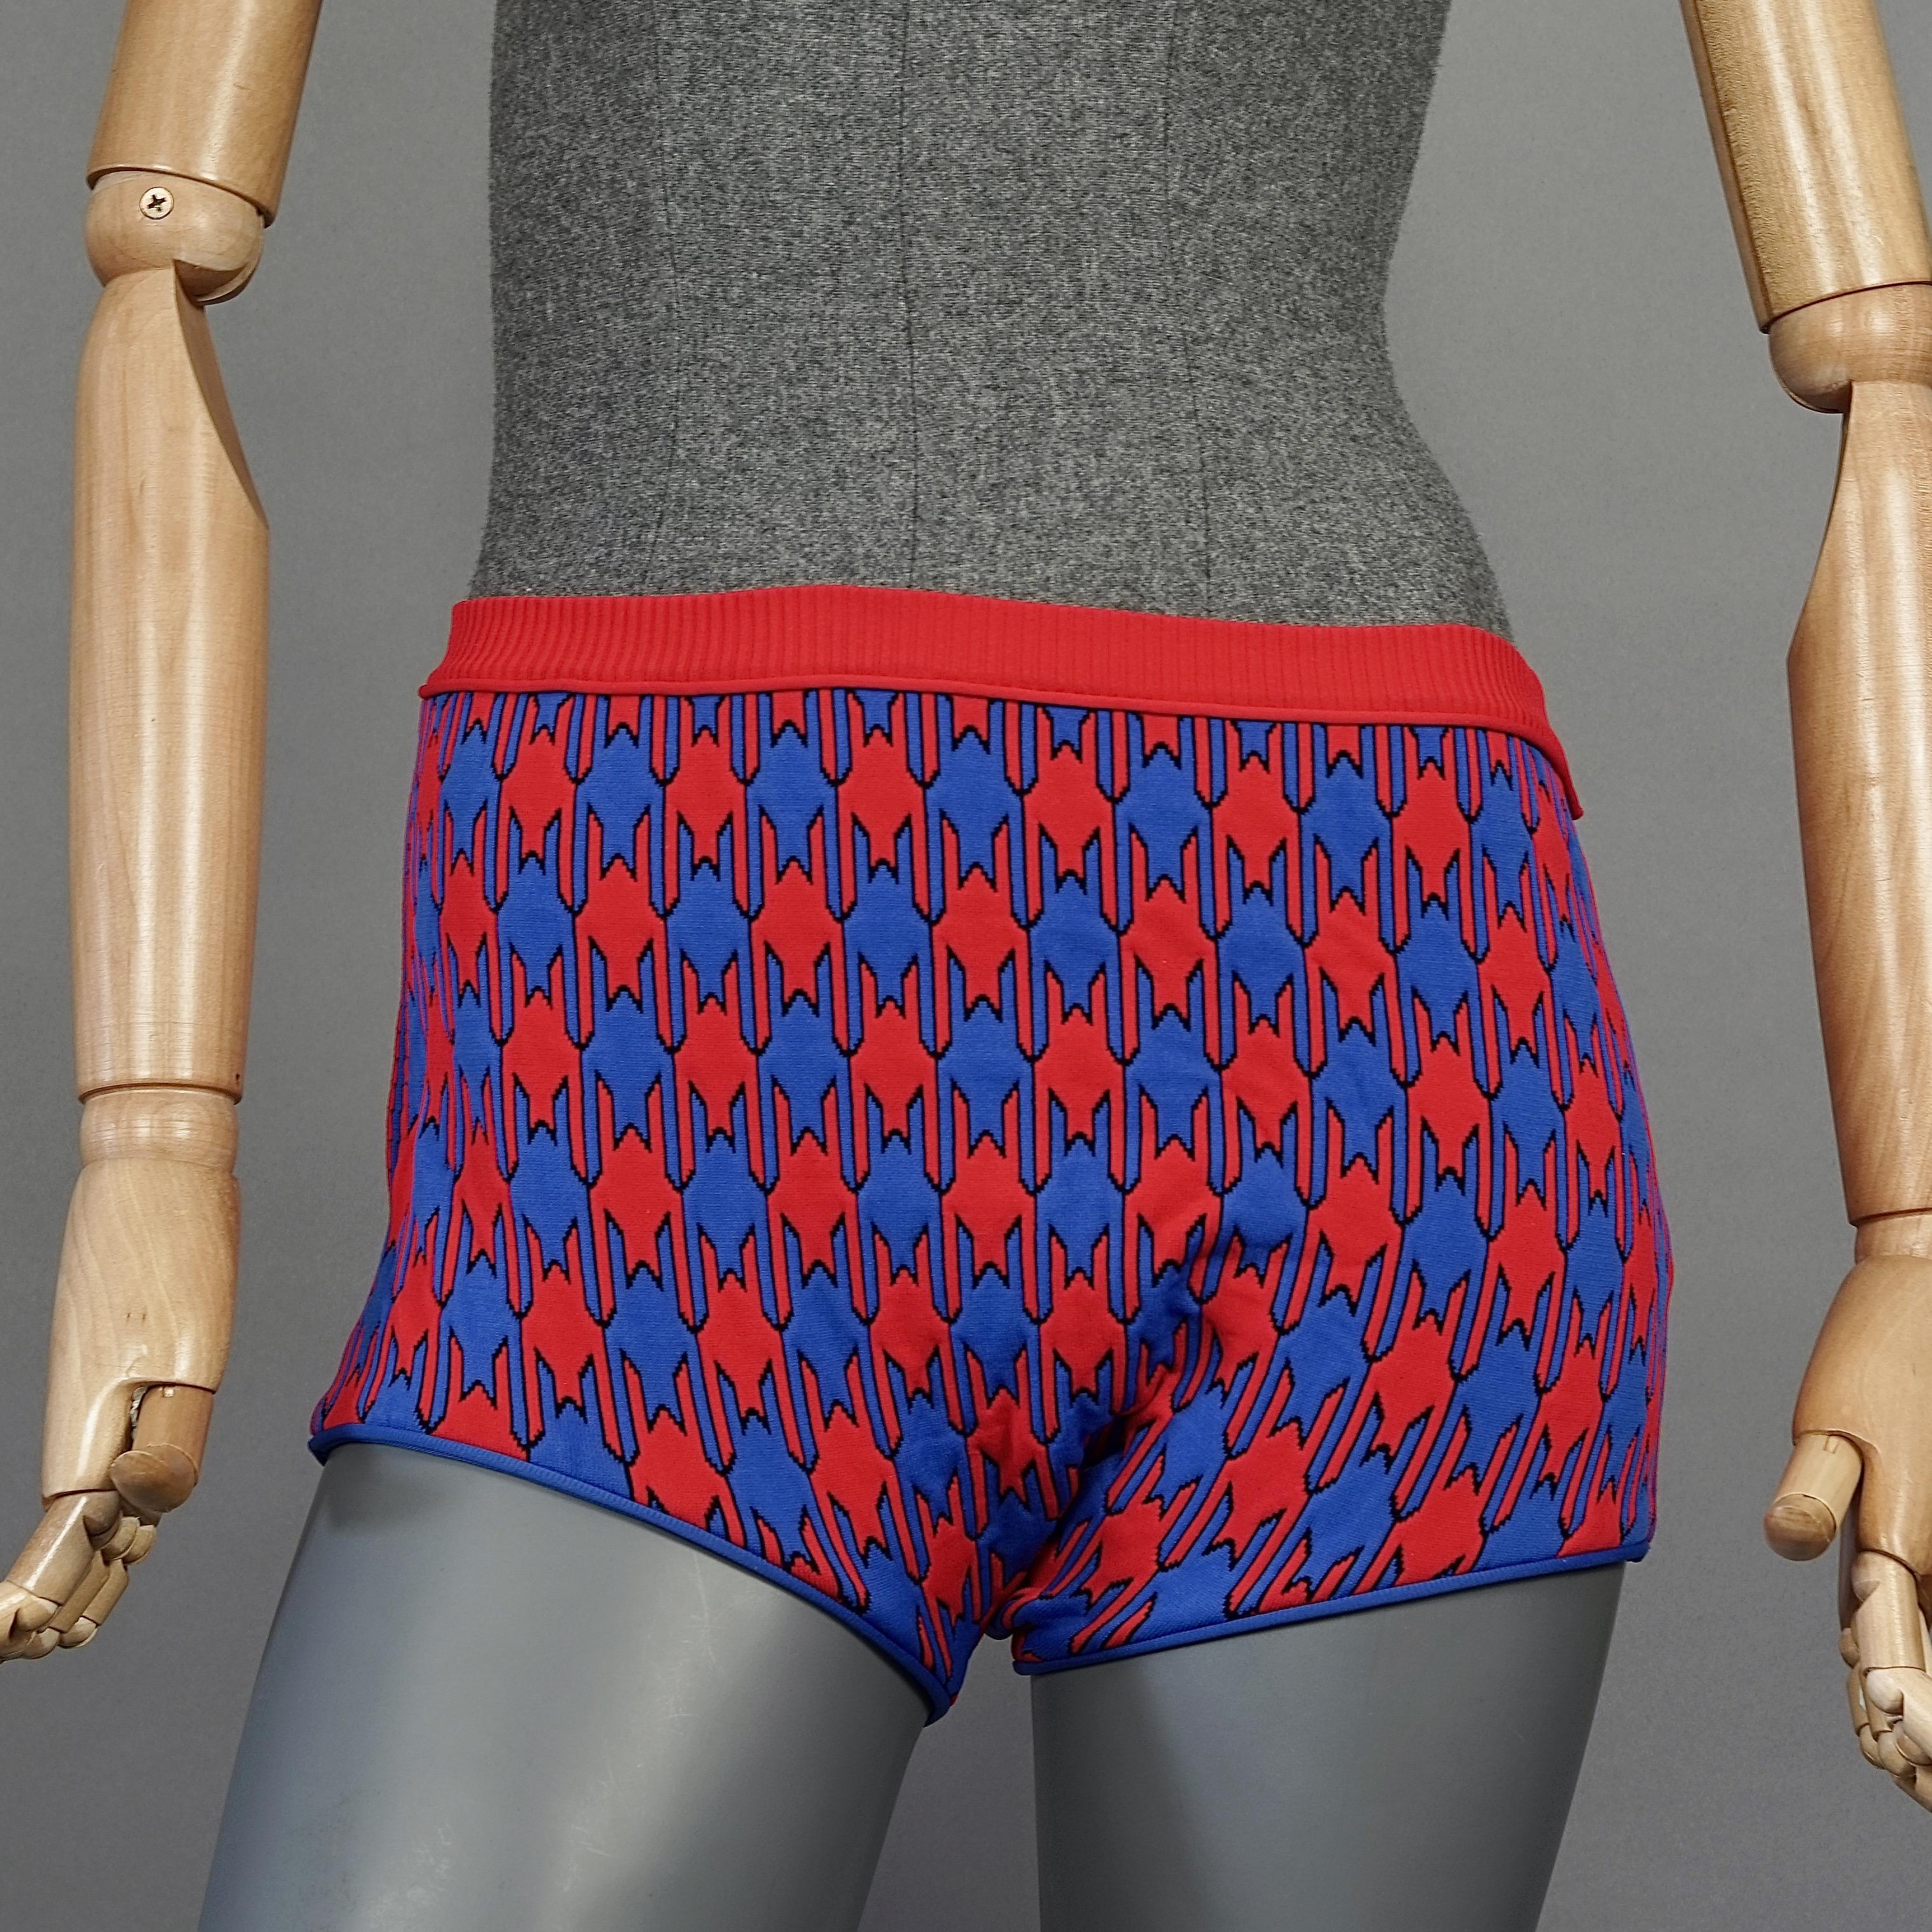 S/S 2015 CELINE Vibrant Diamond Jacquard Knit Shorts

Measurements taken laid flat, double waist and hips:
Waist: 12.20 inches (31 cm) without stretching
Hips: 16.14 inches (41 cm) without stretching
Length: 12.20 inches (31 cm)

Features:
- 100%